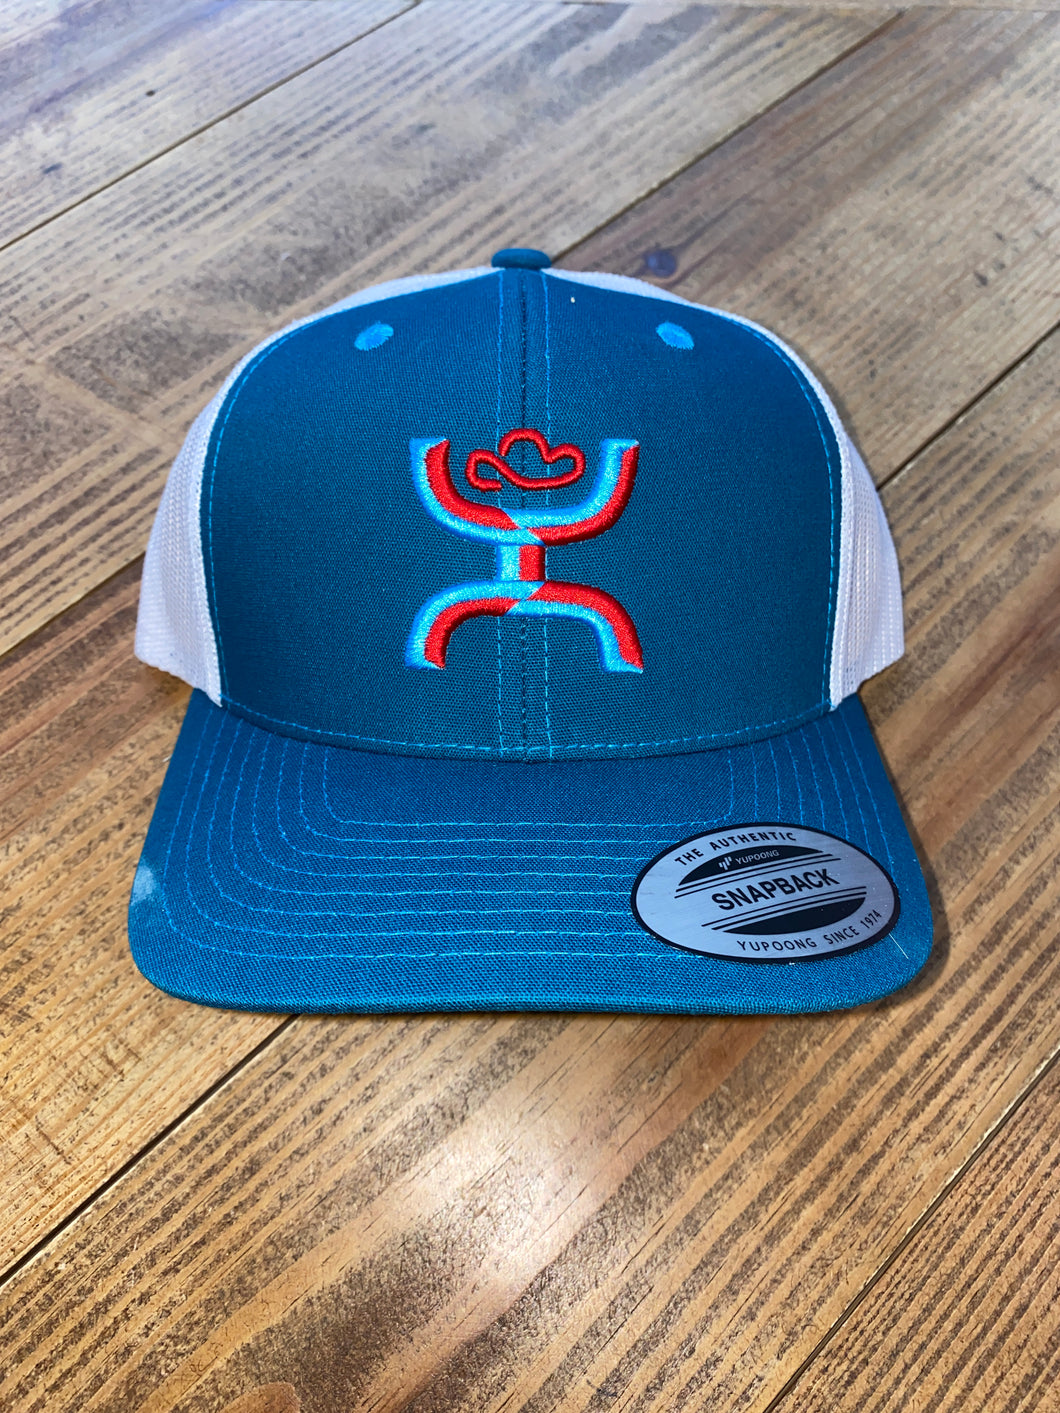 Hooey “Sterling” Turquoise and White Trucker Cap